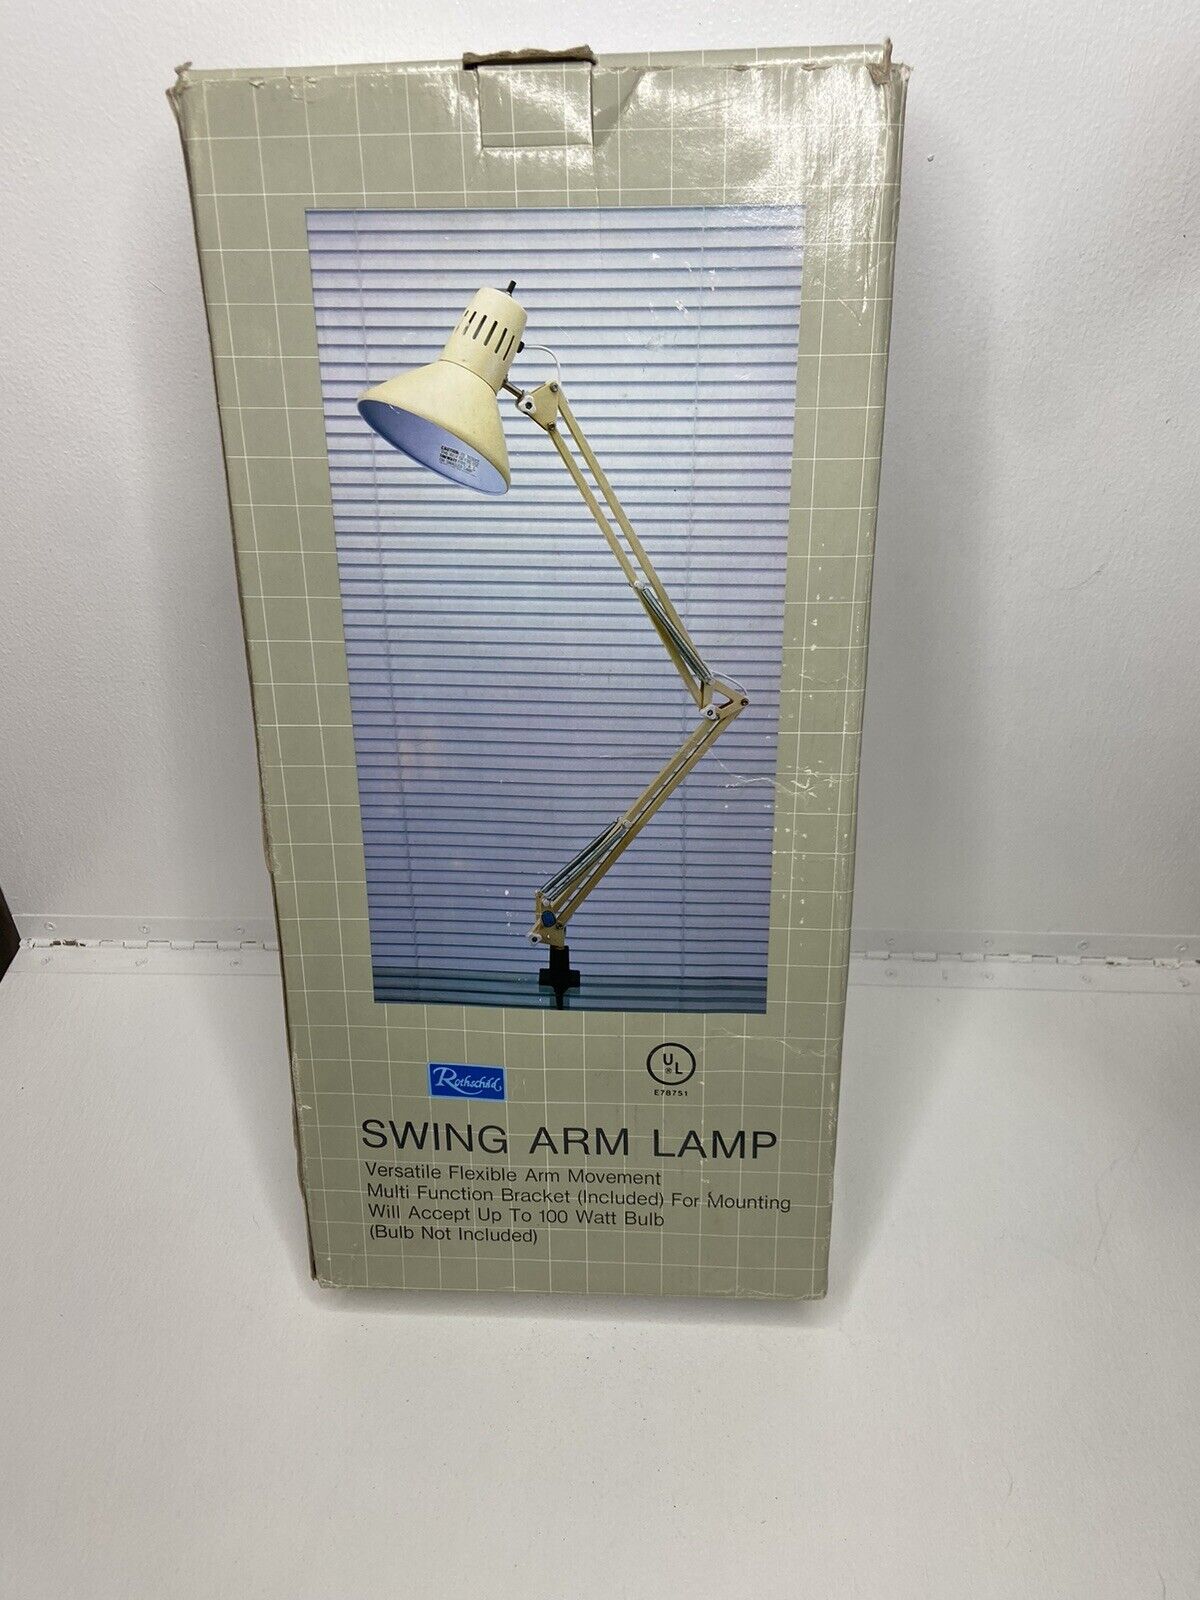 Vintage Rothschild Swing Arm Lamp - 80’s - New In Box